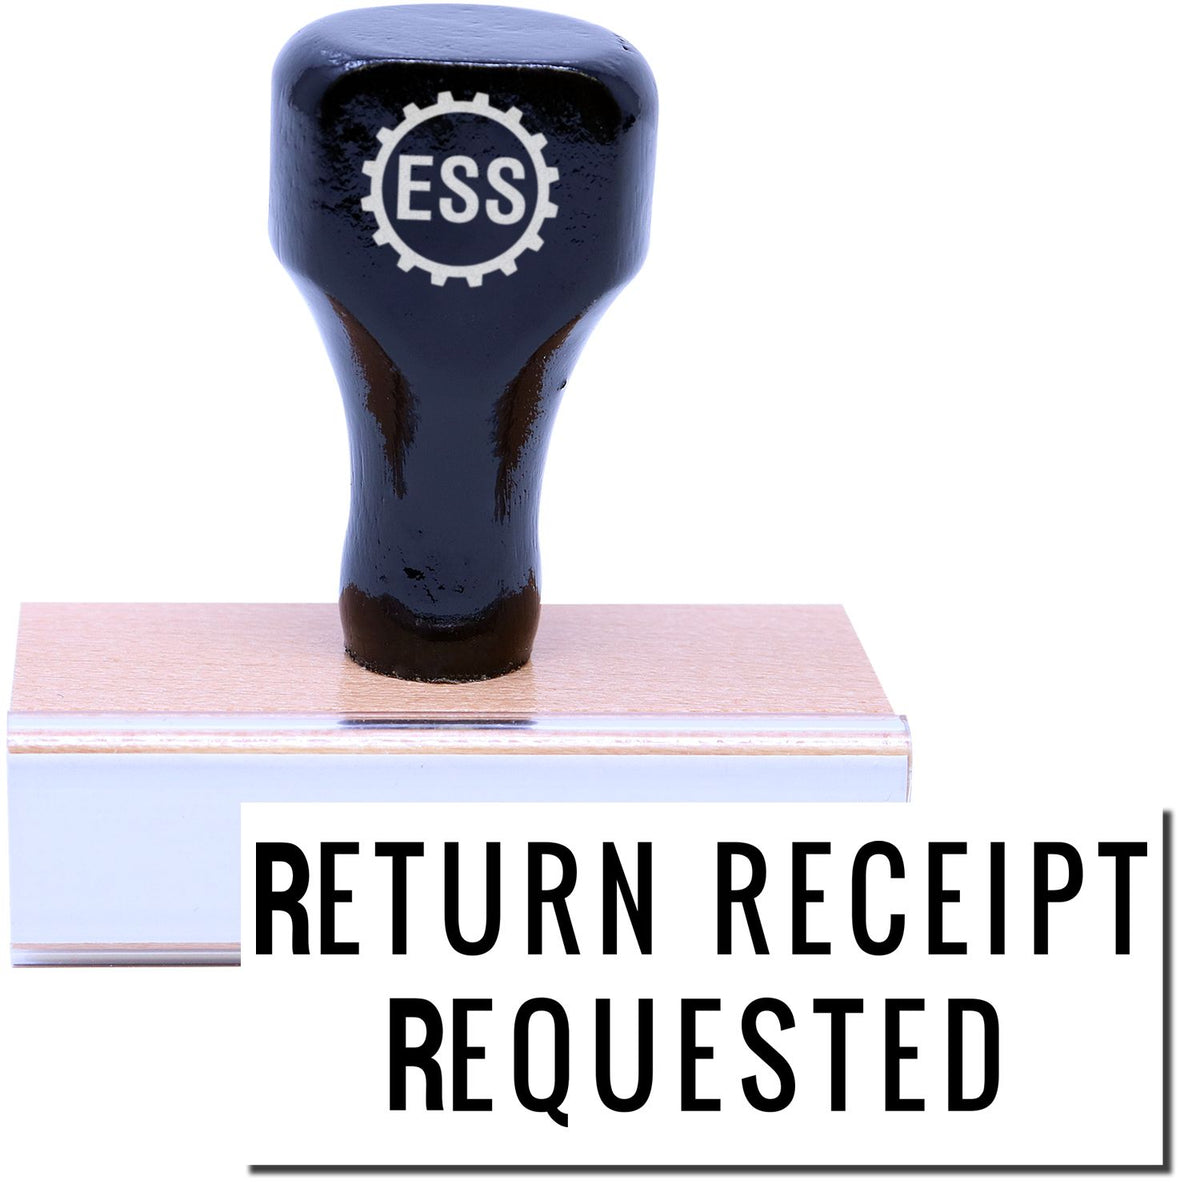 Narrow Font Return Receipt Requested Rubber Stamp